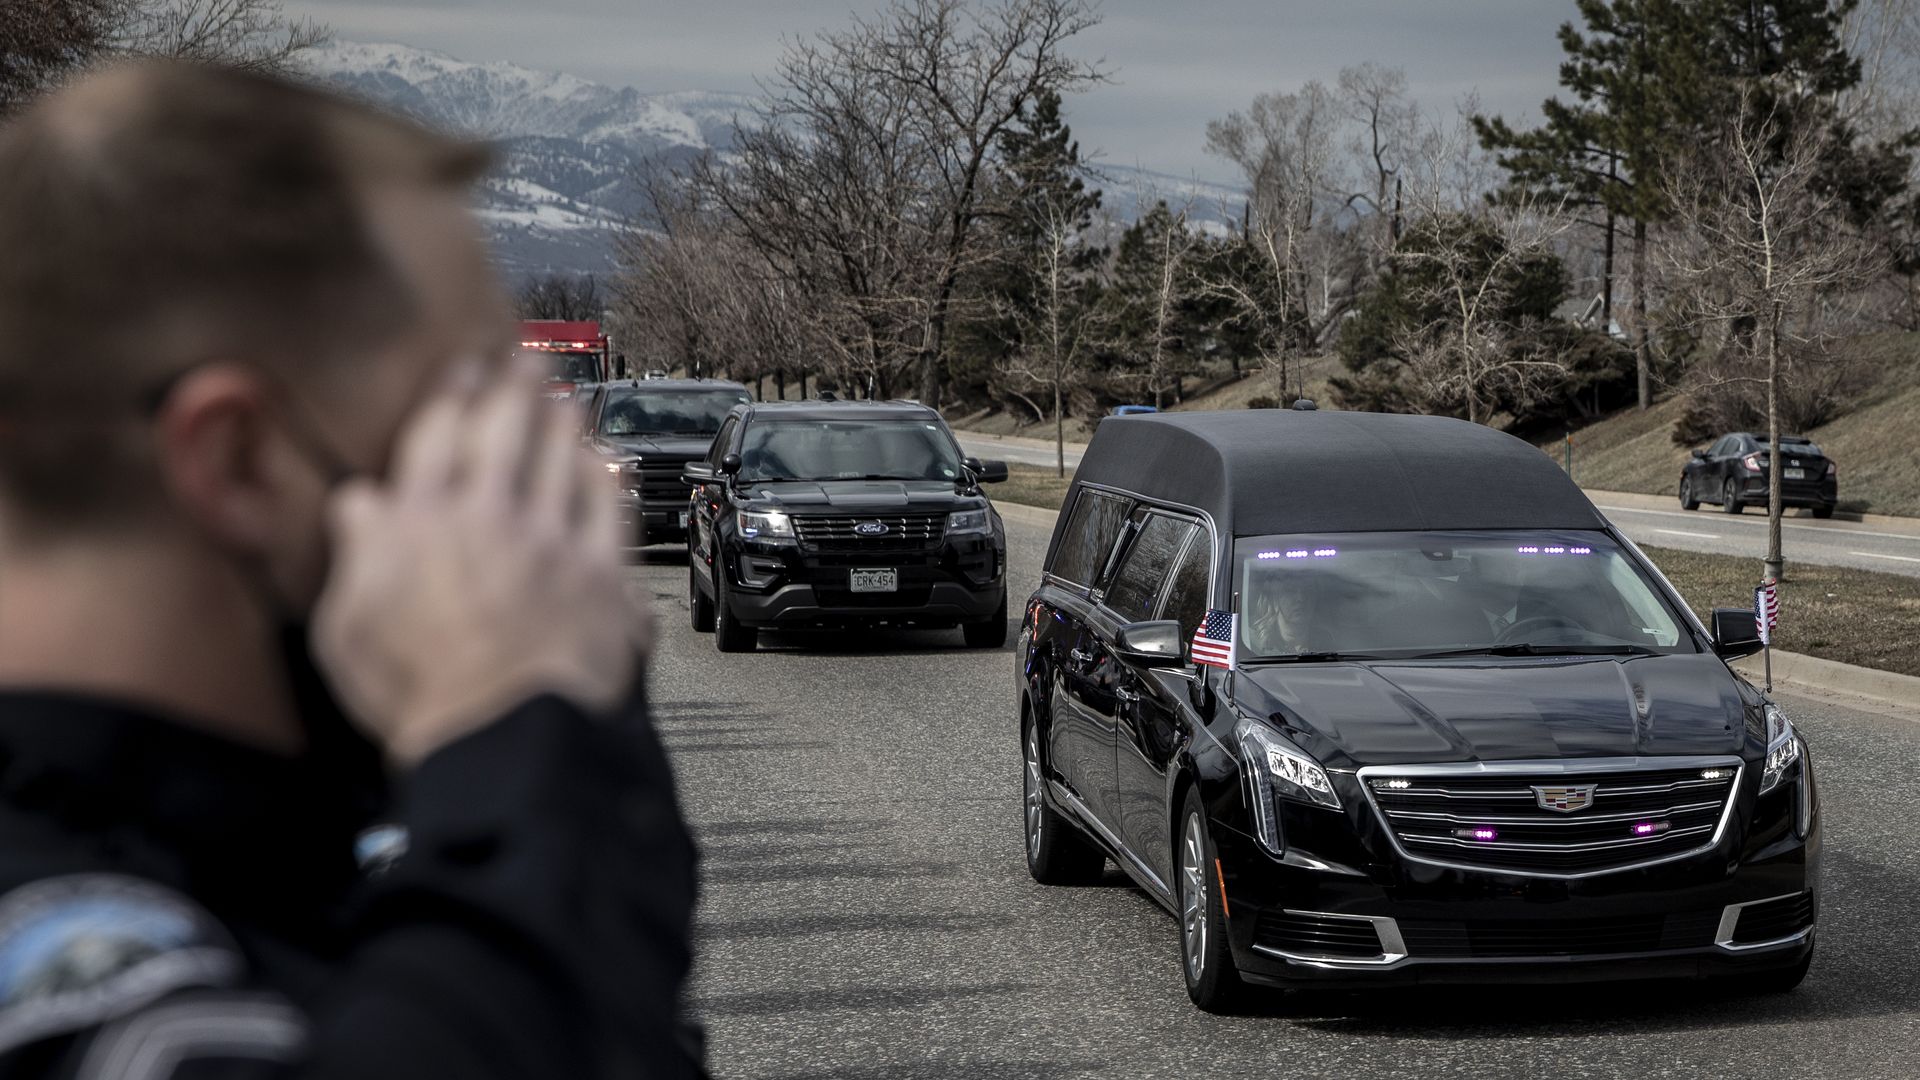 Law enforcement vehicles escort the body of slain Boulder Police Officer Eric Talley to Arvada, Colorado on Wednesday, March 24, 2021.